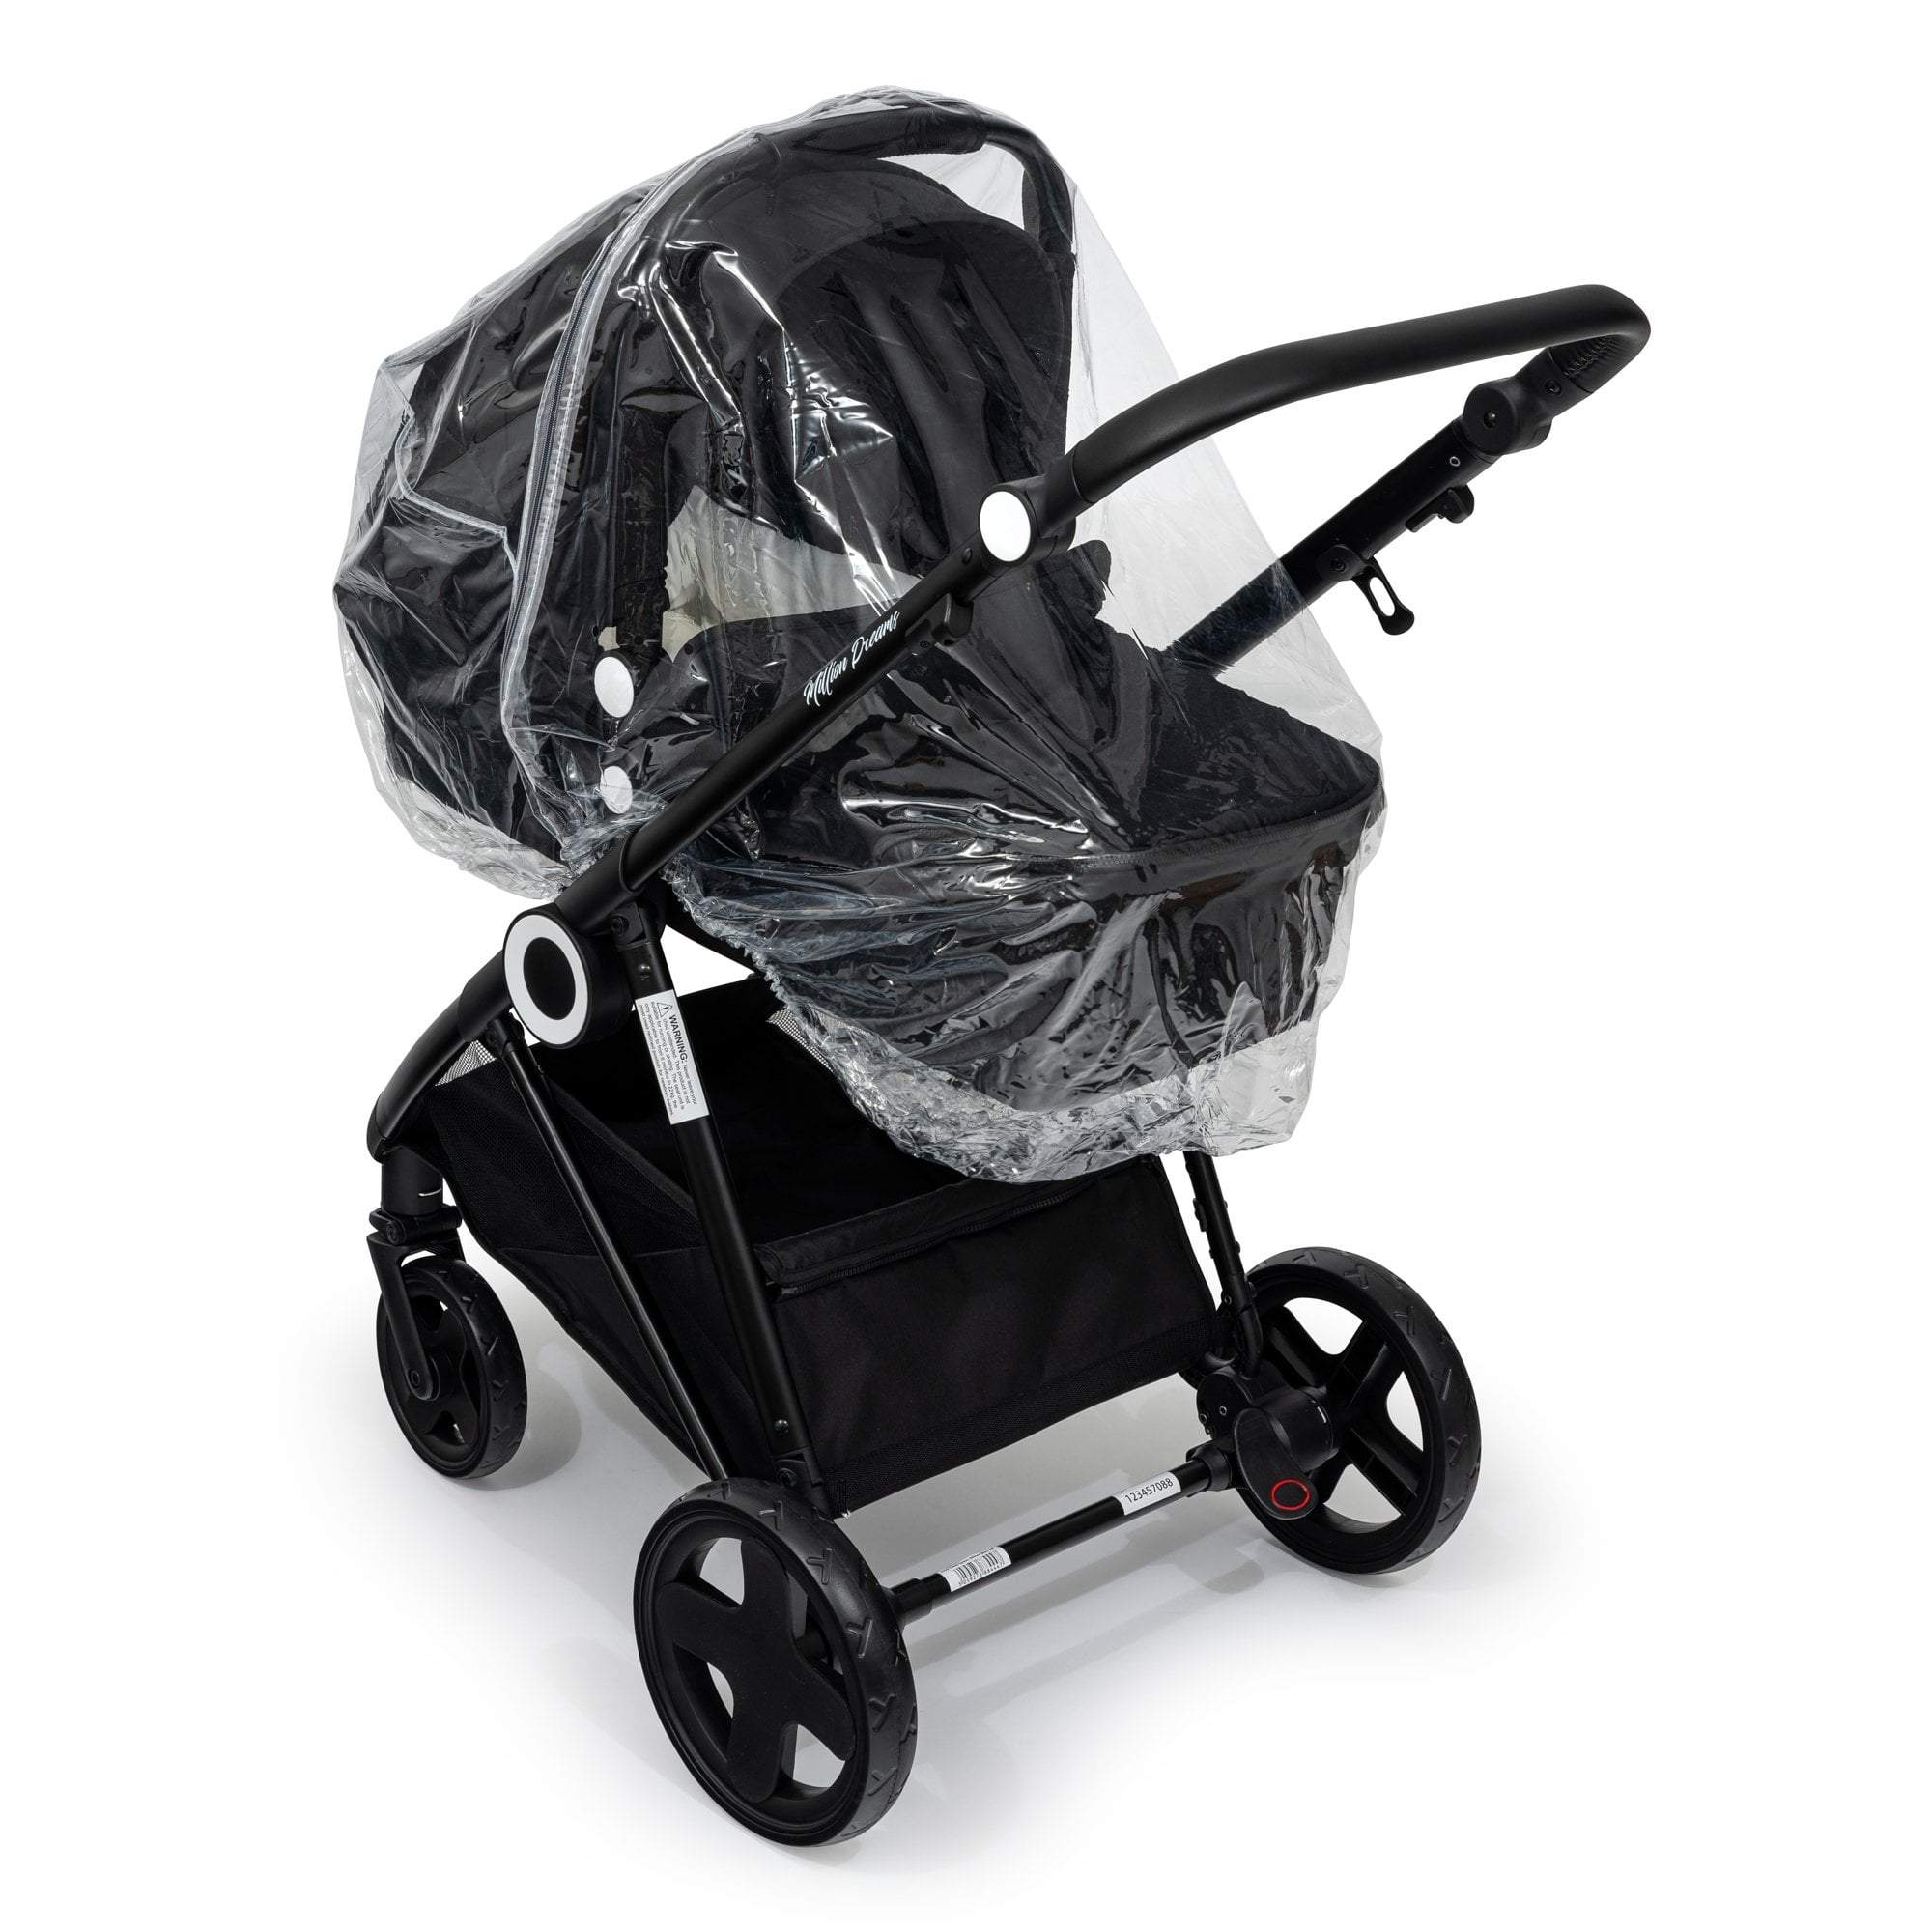 Carrycot Raincover Compatible With Norton - Fits All Models - For Your Little One